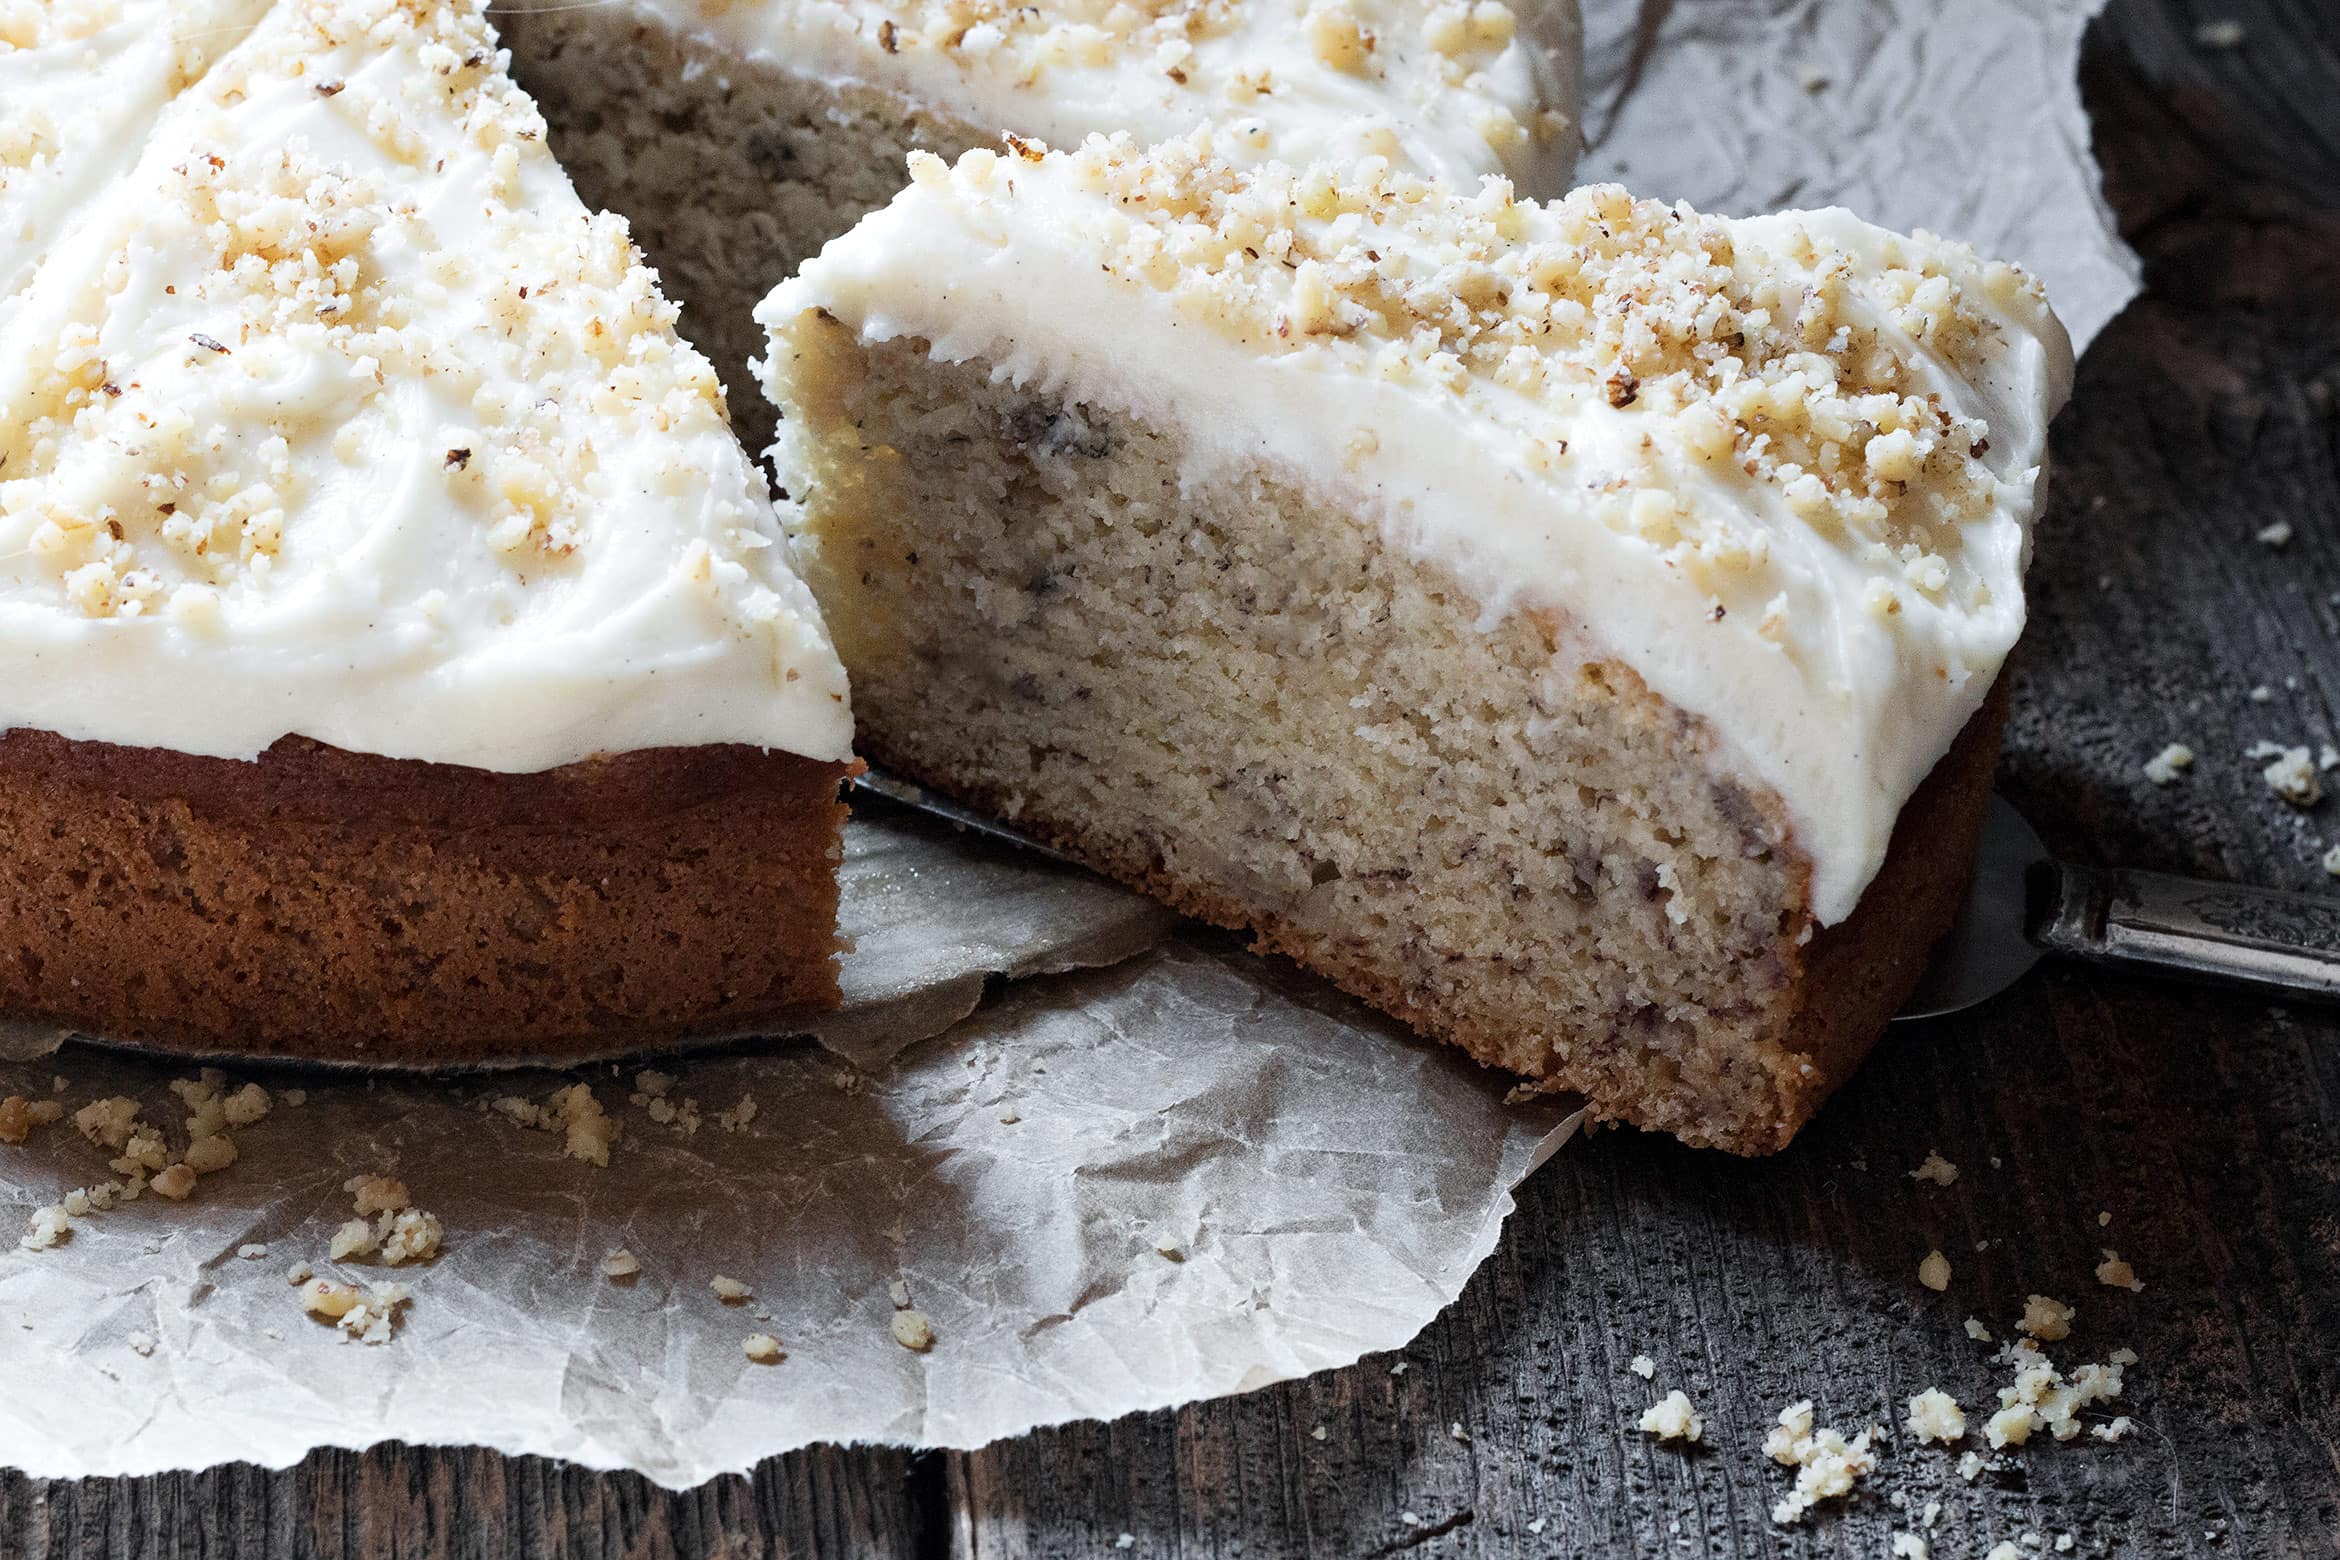 erfect Banana Cake with Cream Cheese Frosting